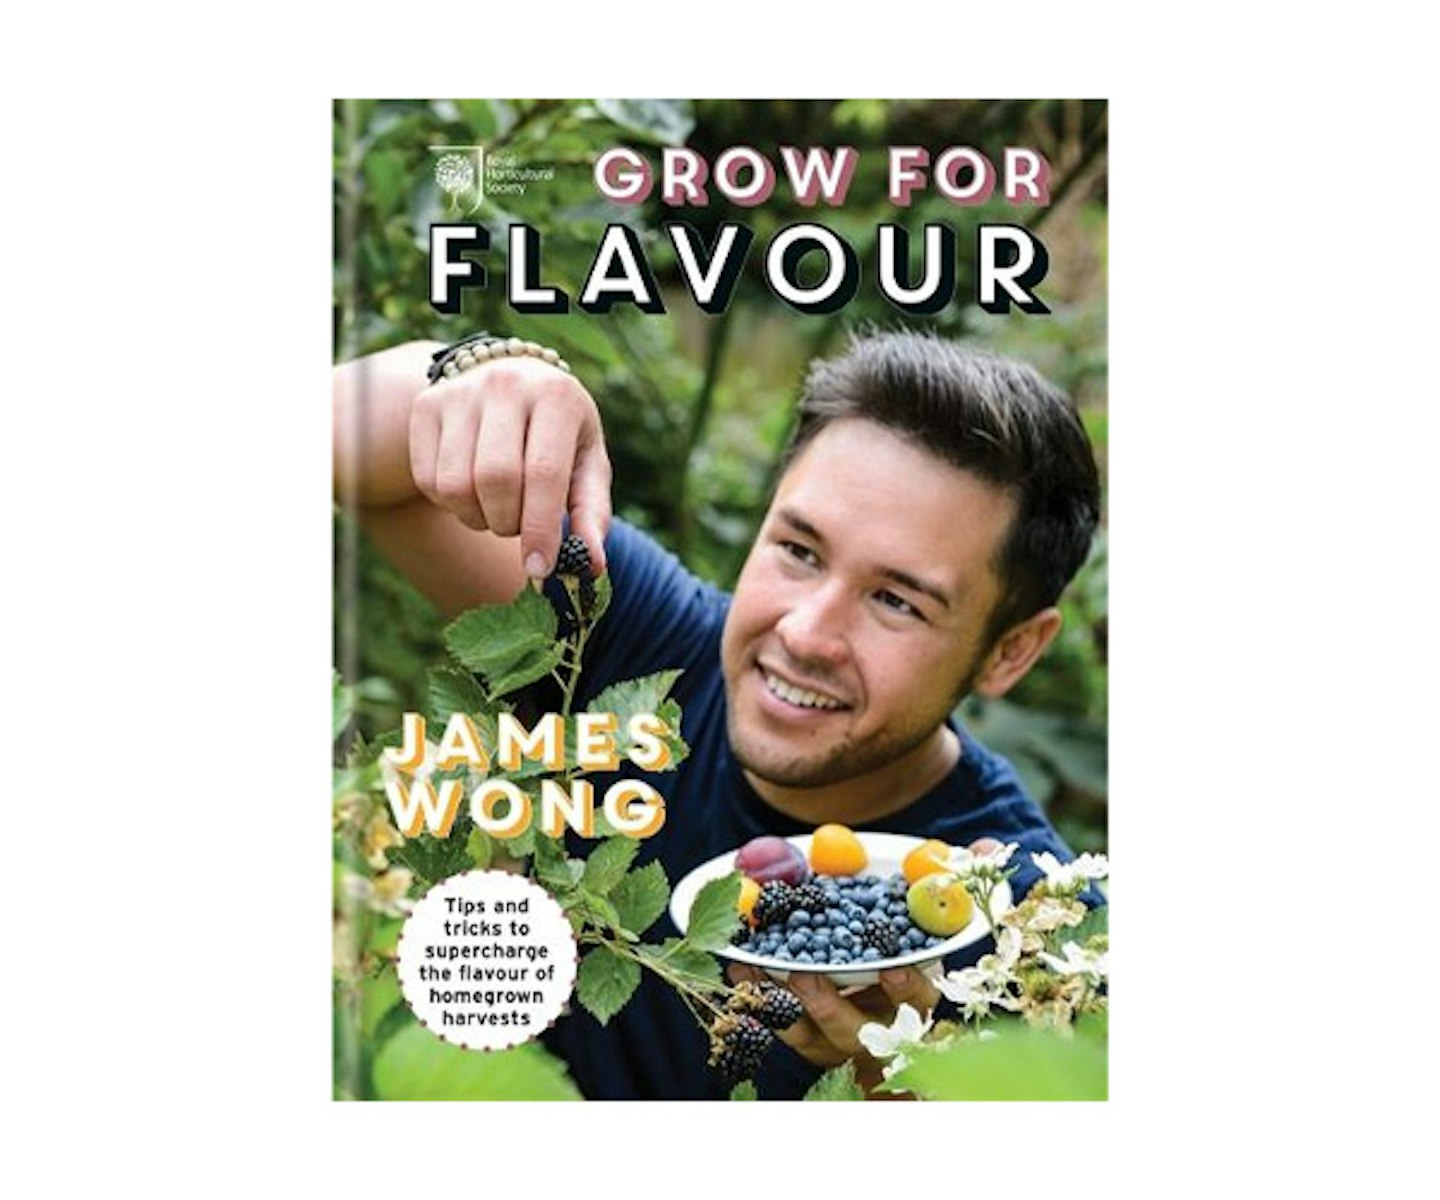 RHS Grow for flavour